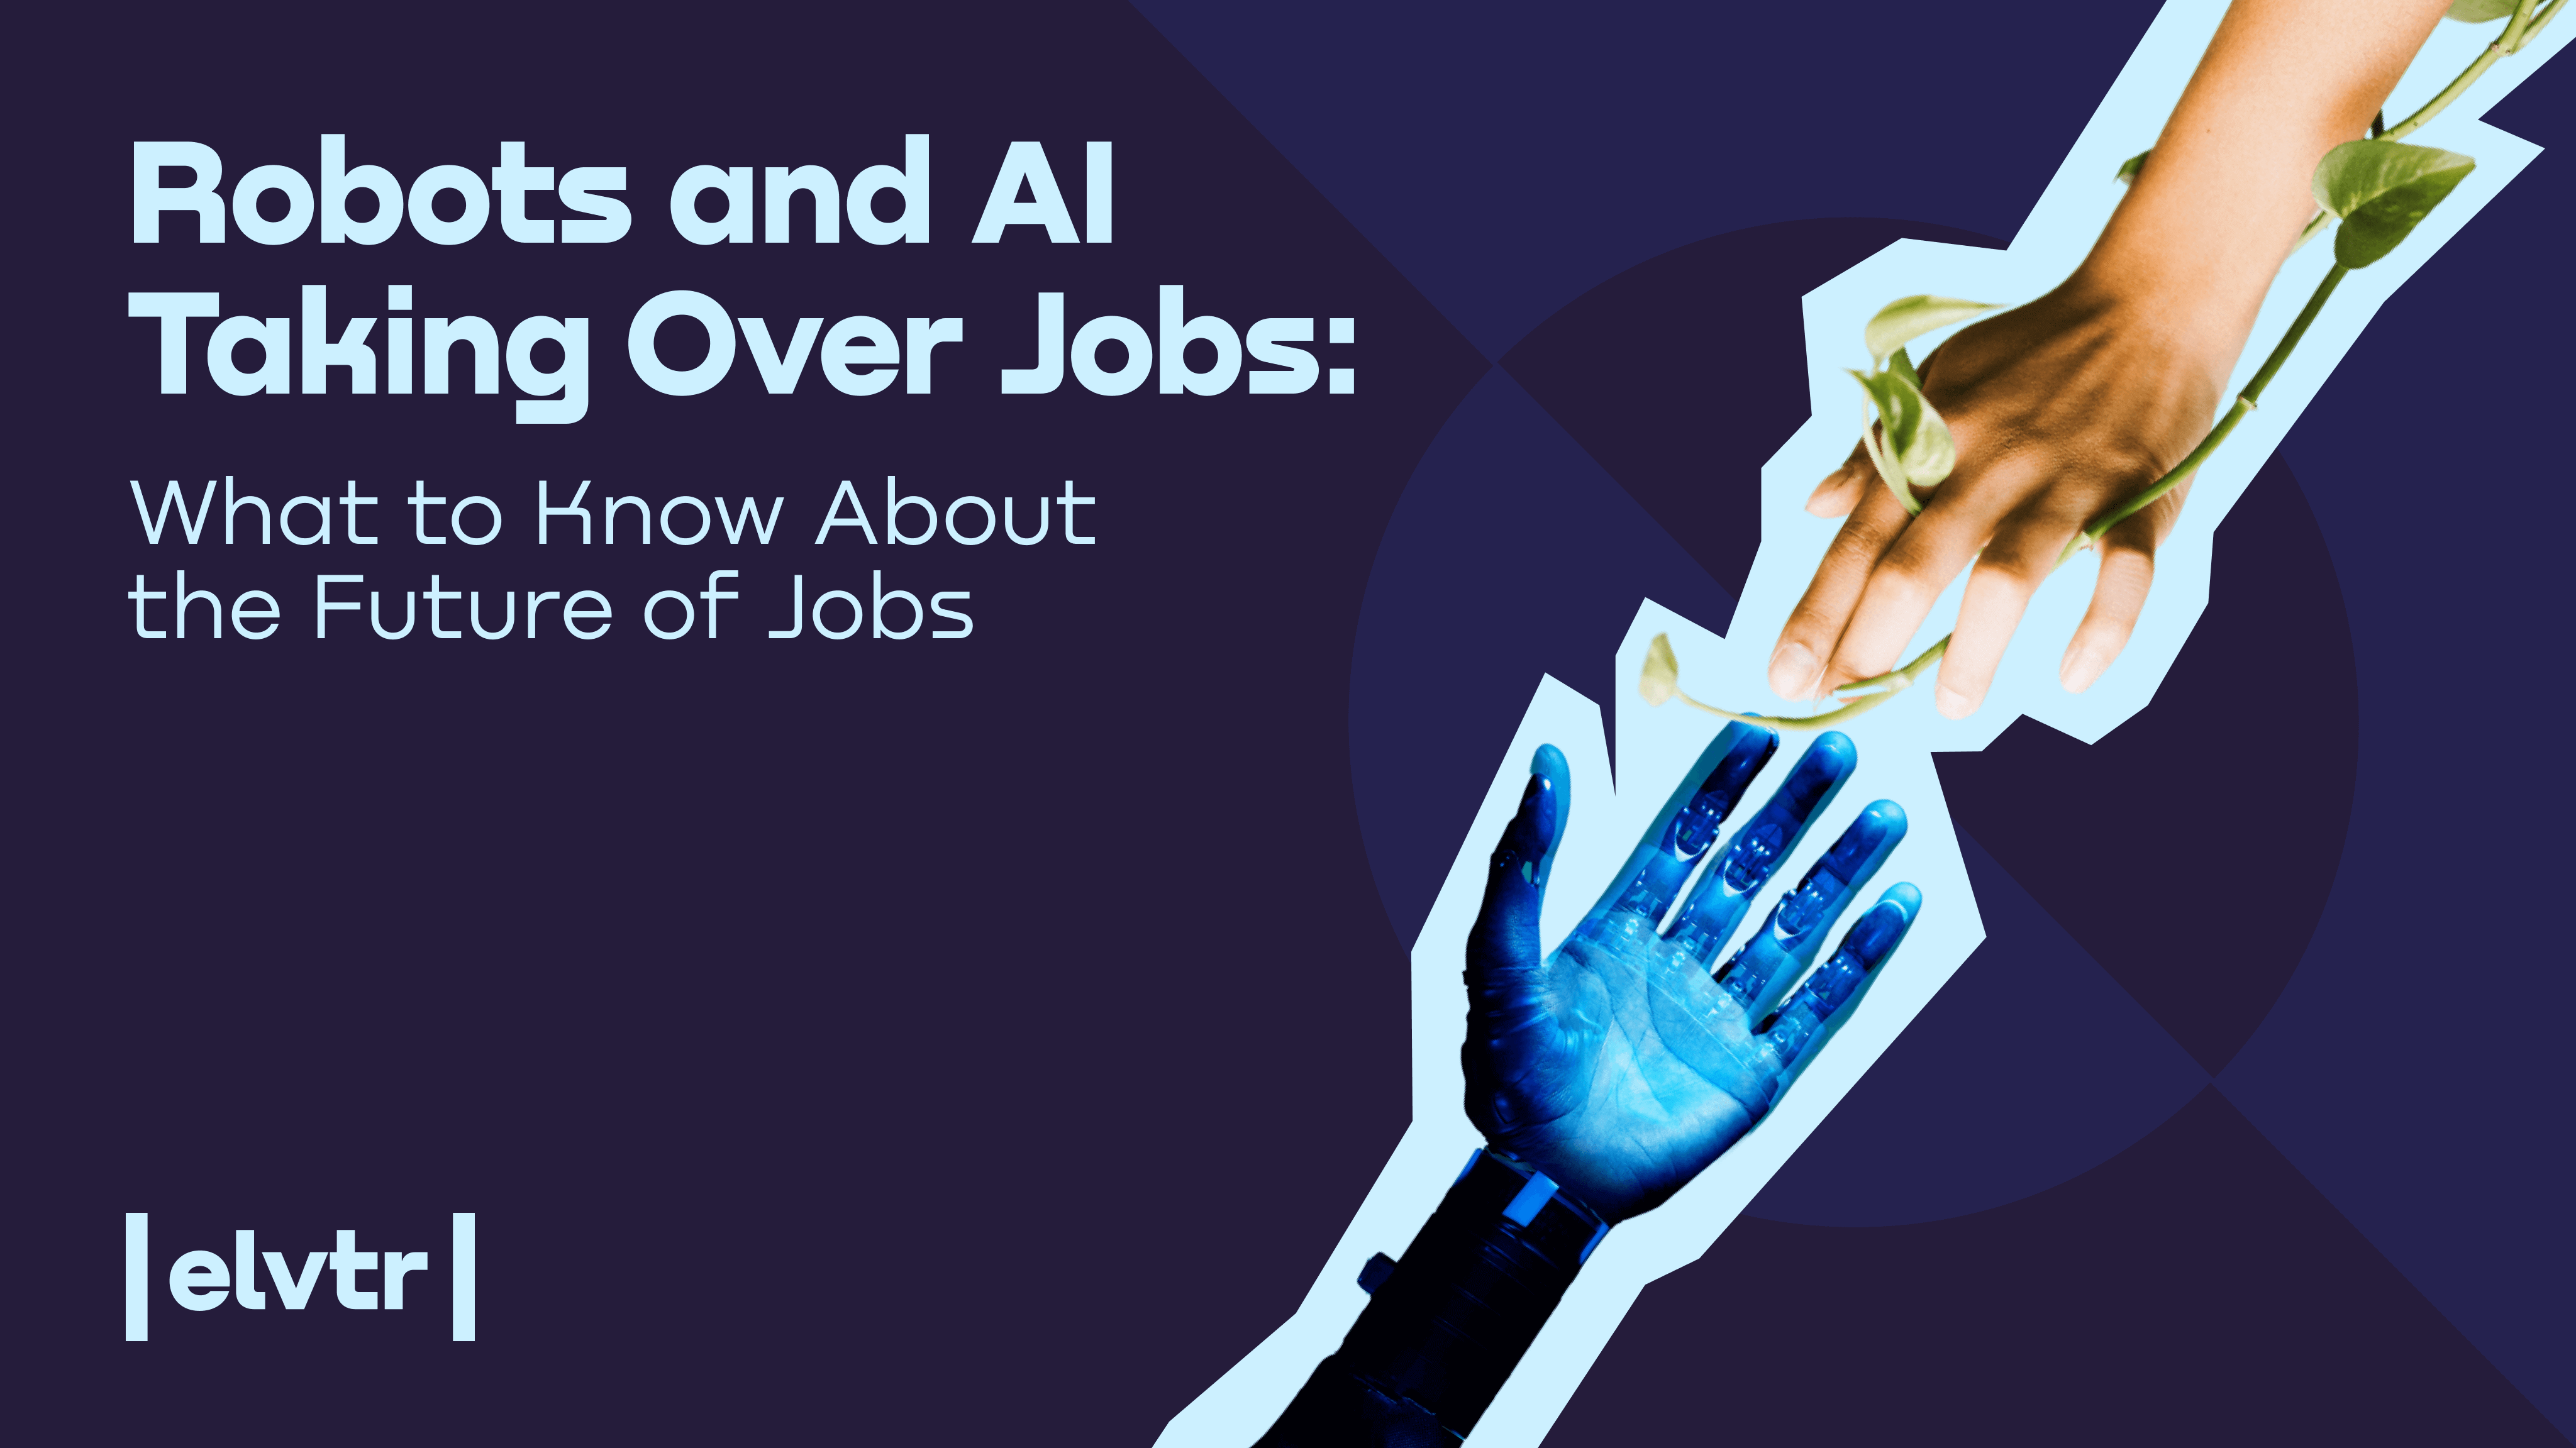 Robots and AI Taking Over Jobs: What to Know About the Future of Jobs image